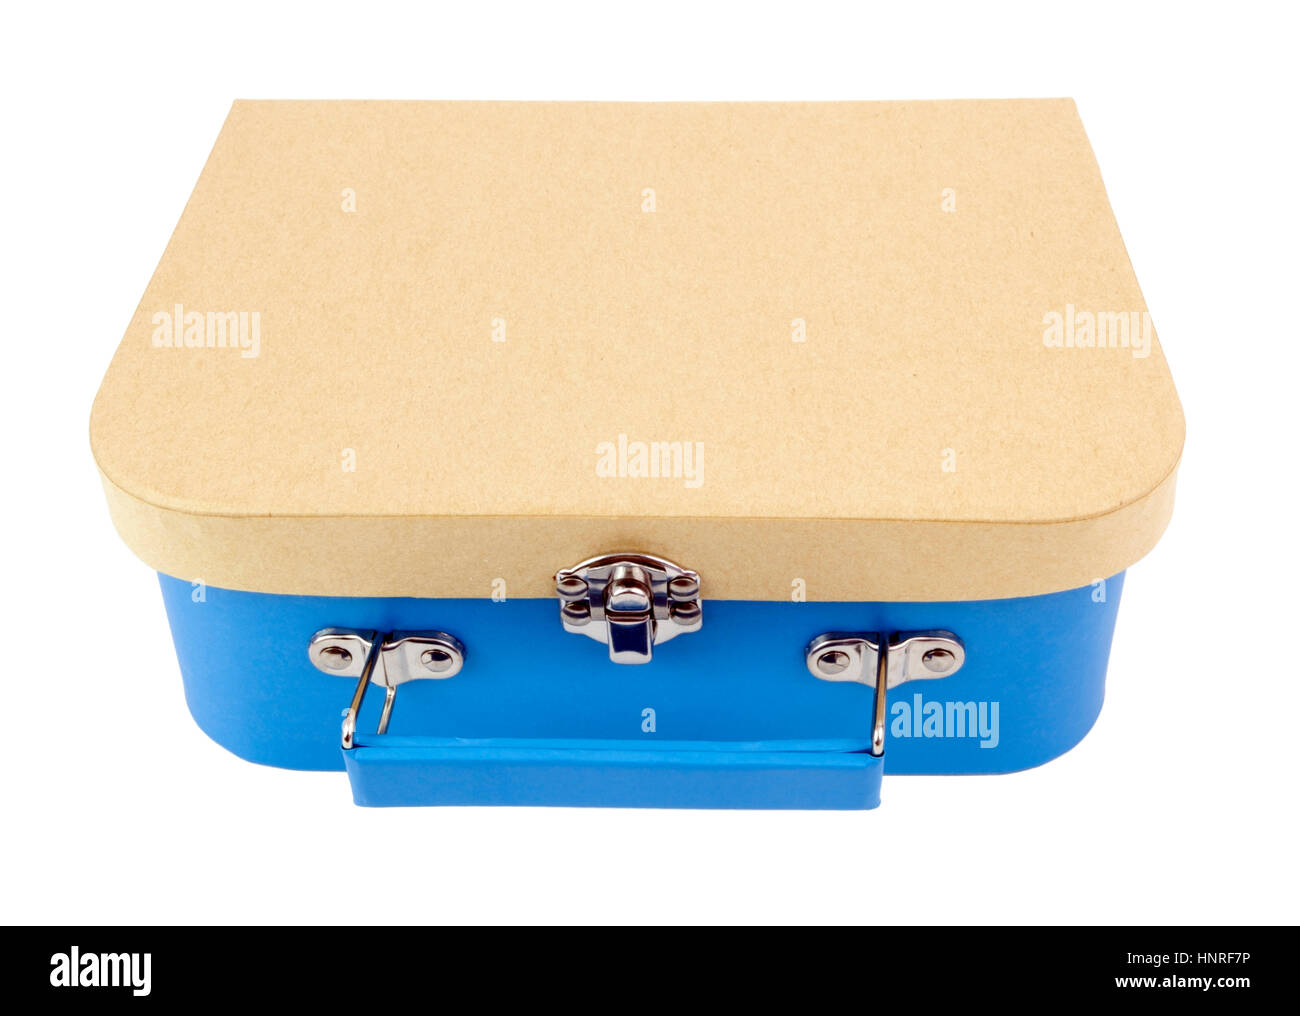 Top and front view of simple tan and blue cardboard case. Isolated. Stock Photo